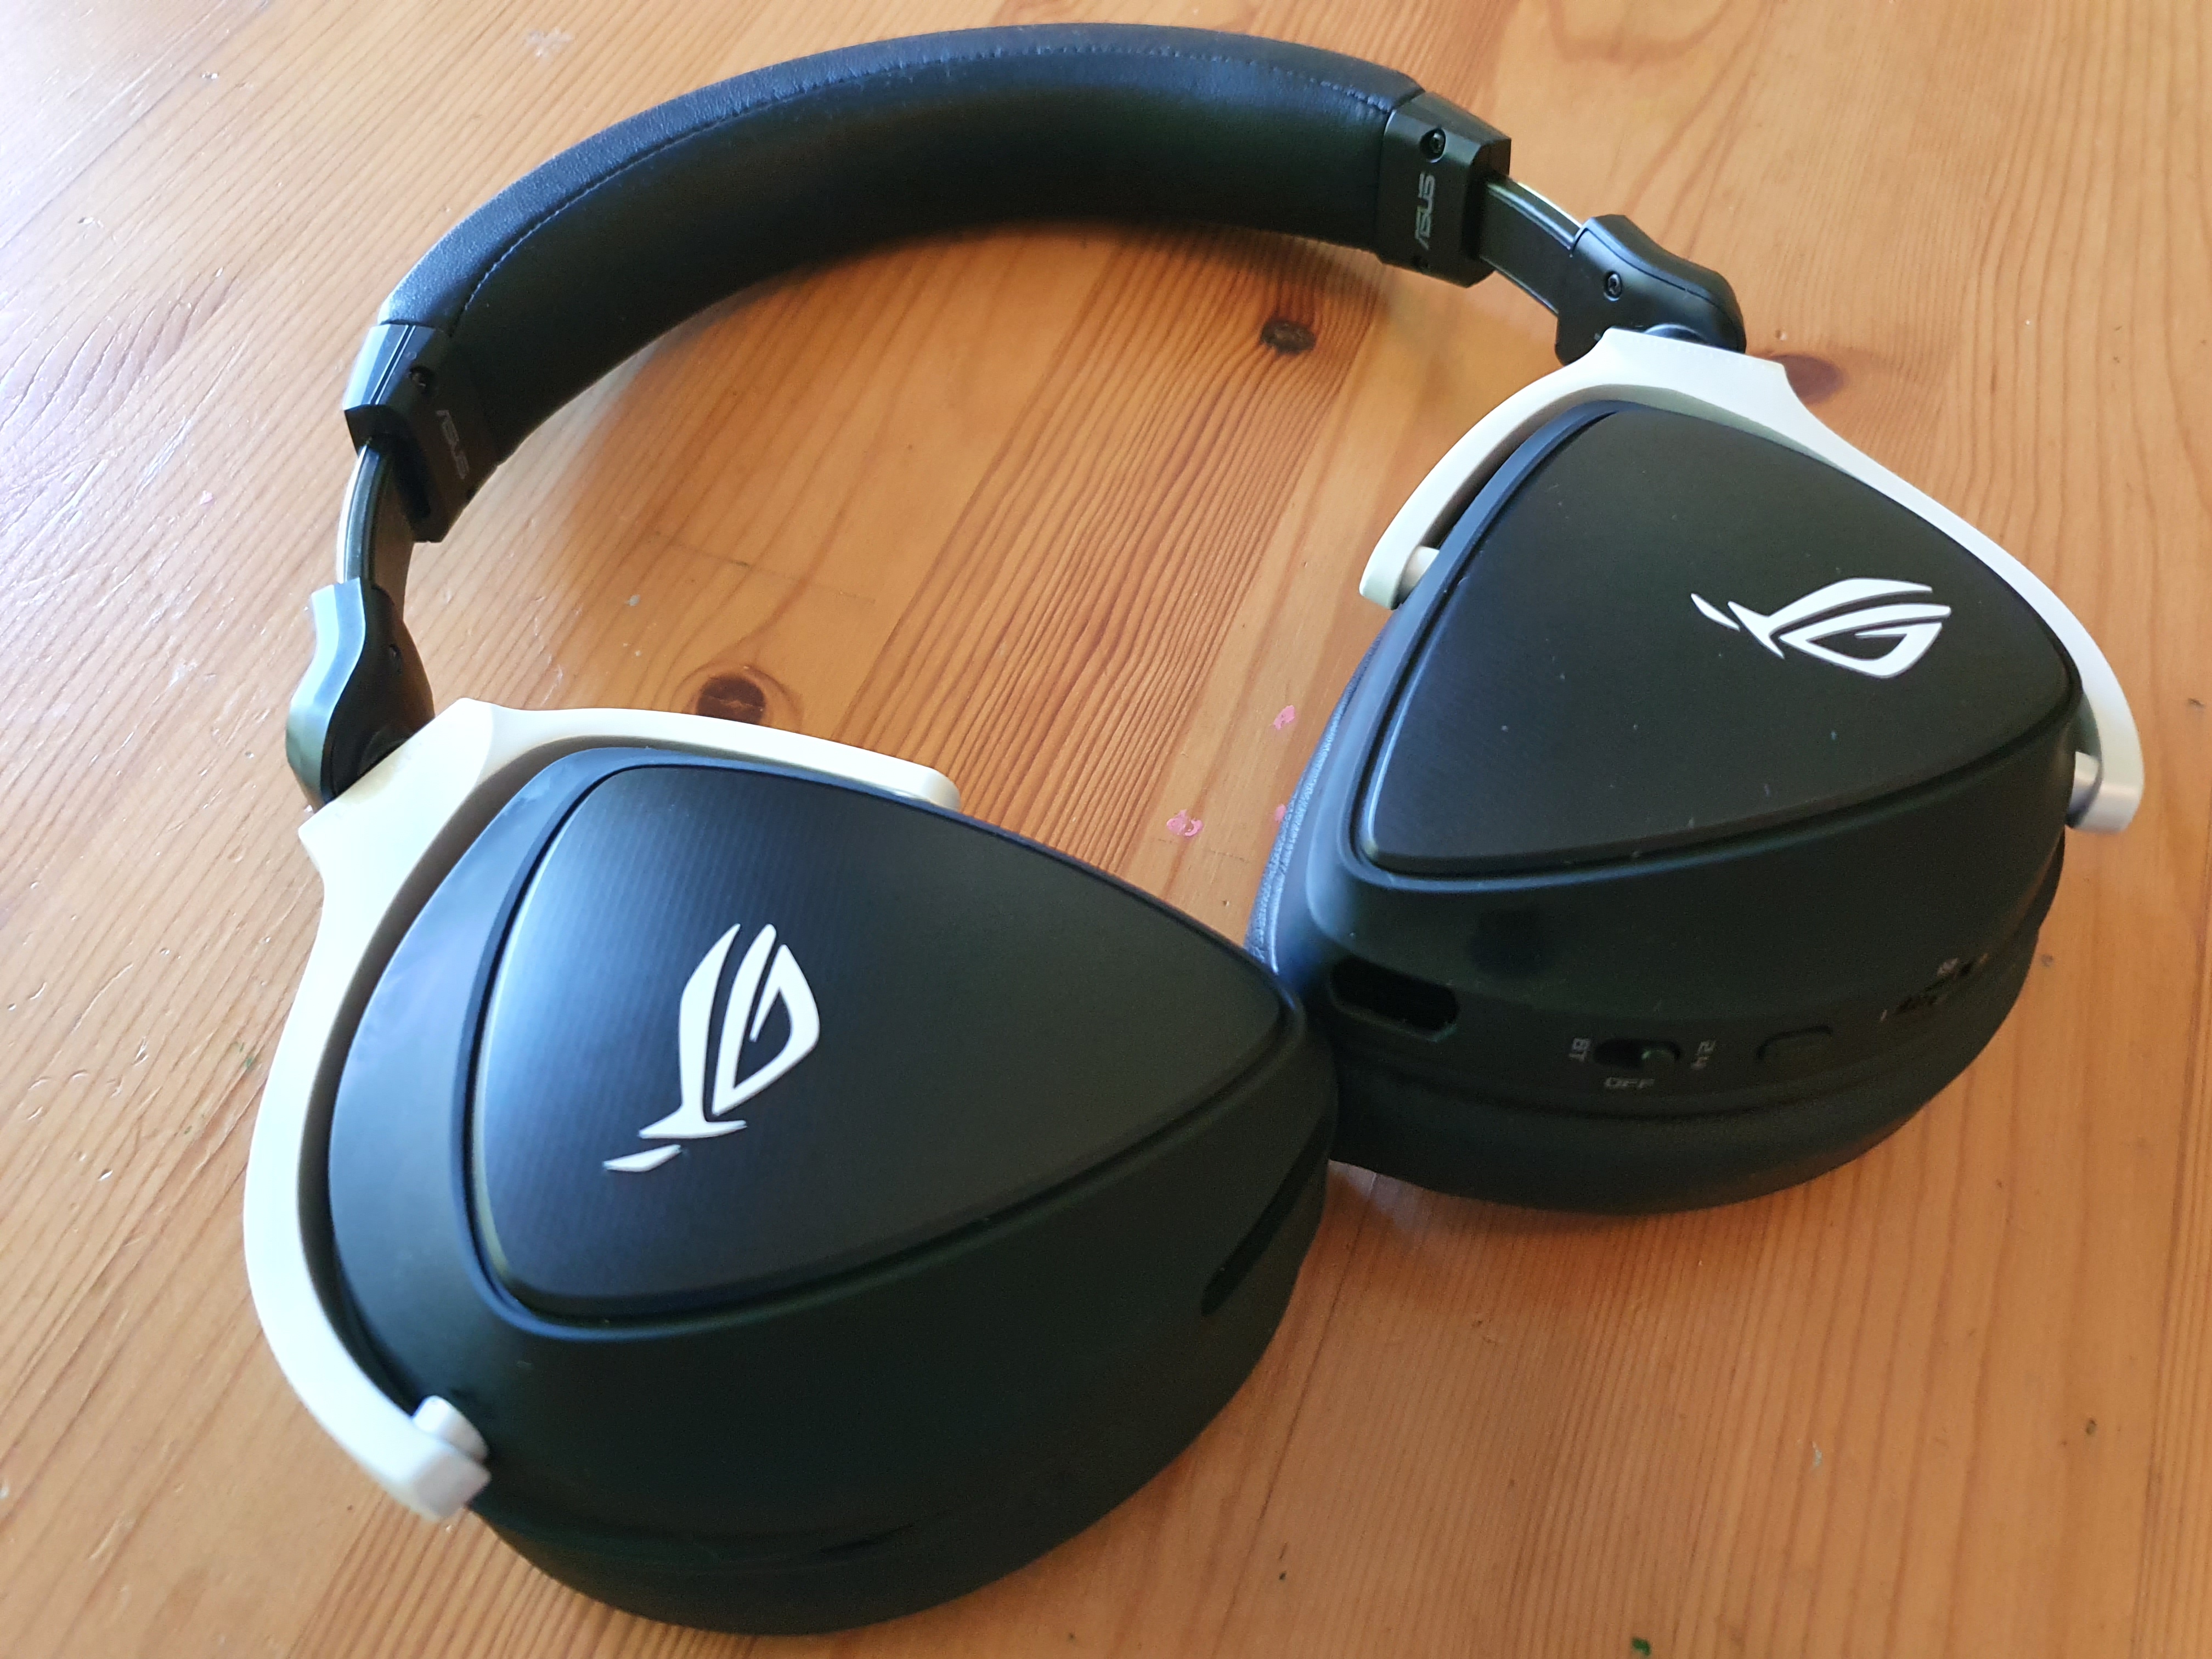 Asus ROG Delta S Wireless - Best for casual gaming